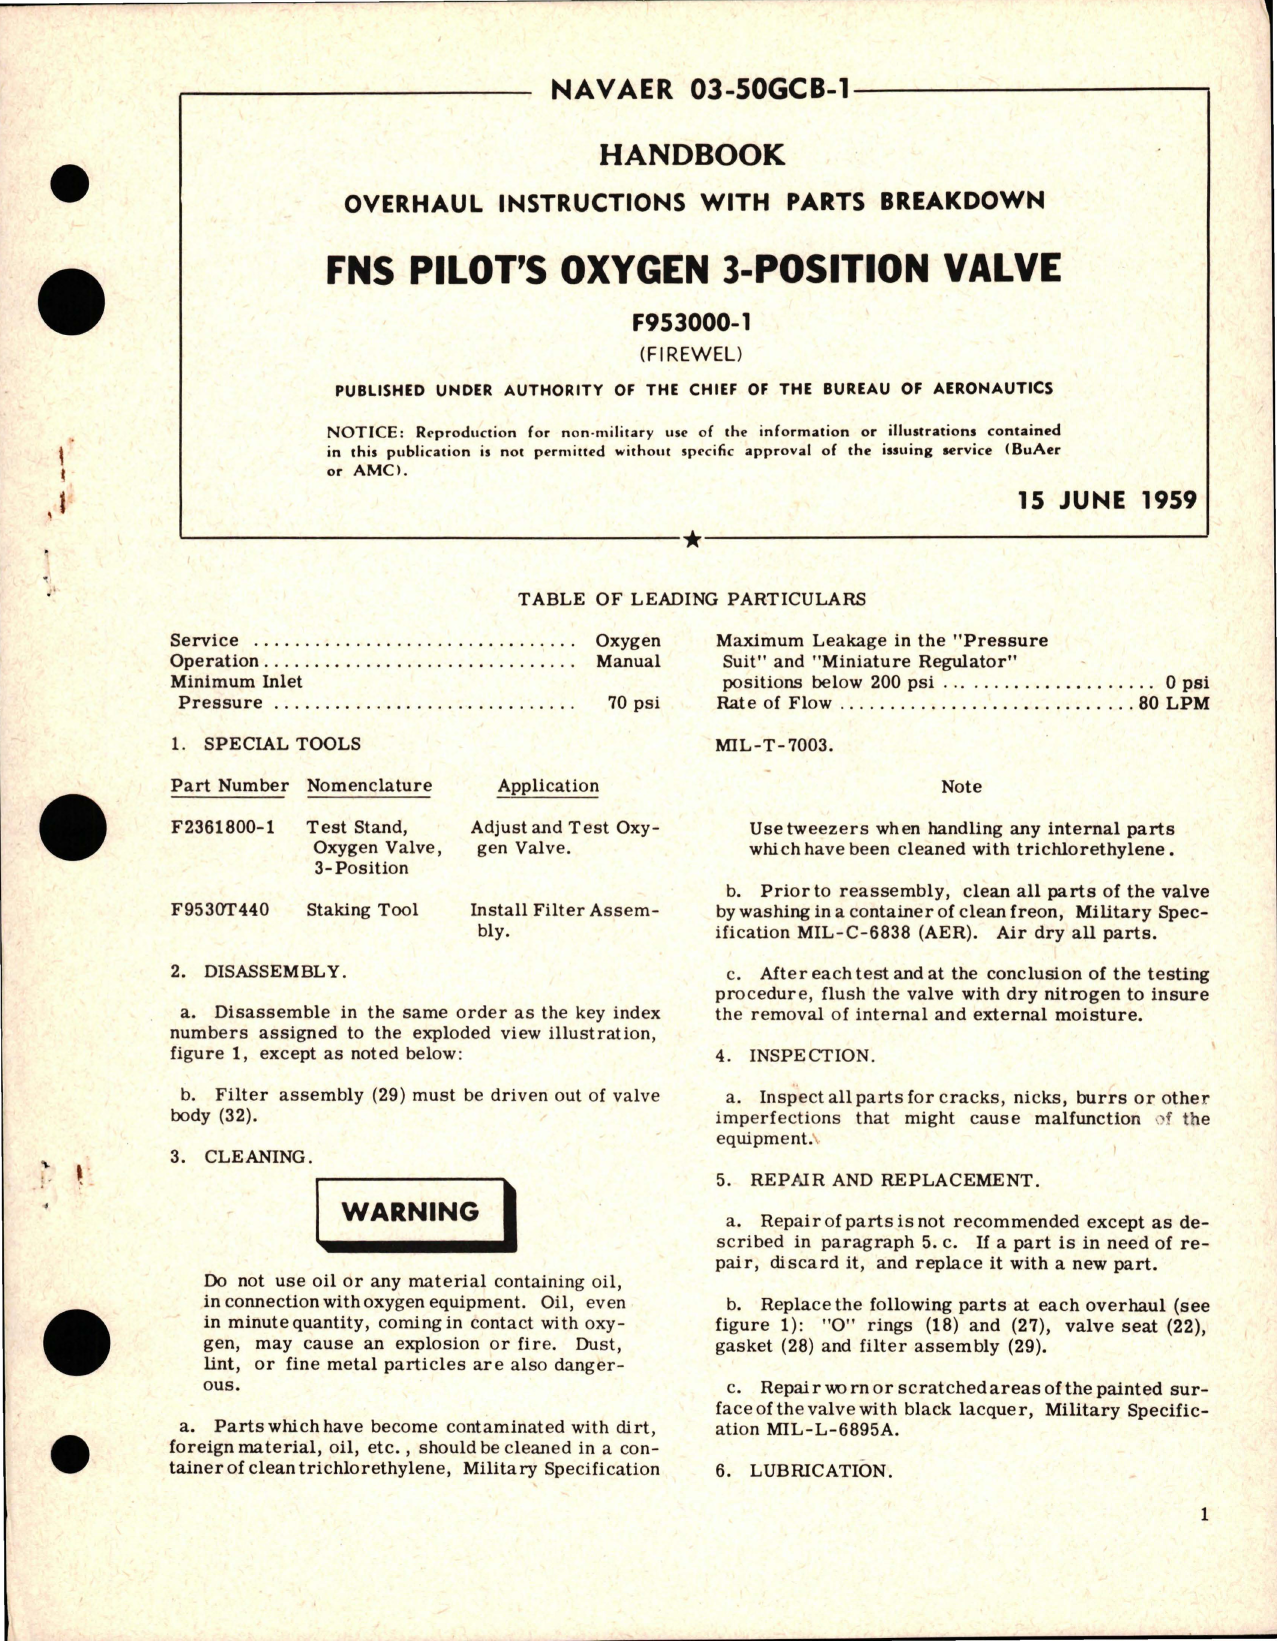 Sample page 1 from AirCorps Library document: Overhaul Instructions with Parts Breakdown for FNS Pilot's Oxygen 3-Position Valve - F953000-1 